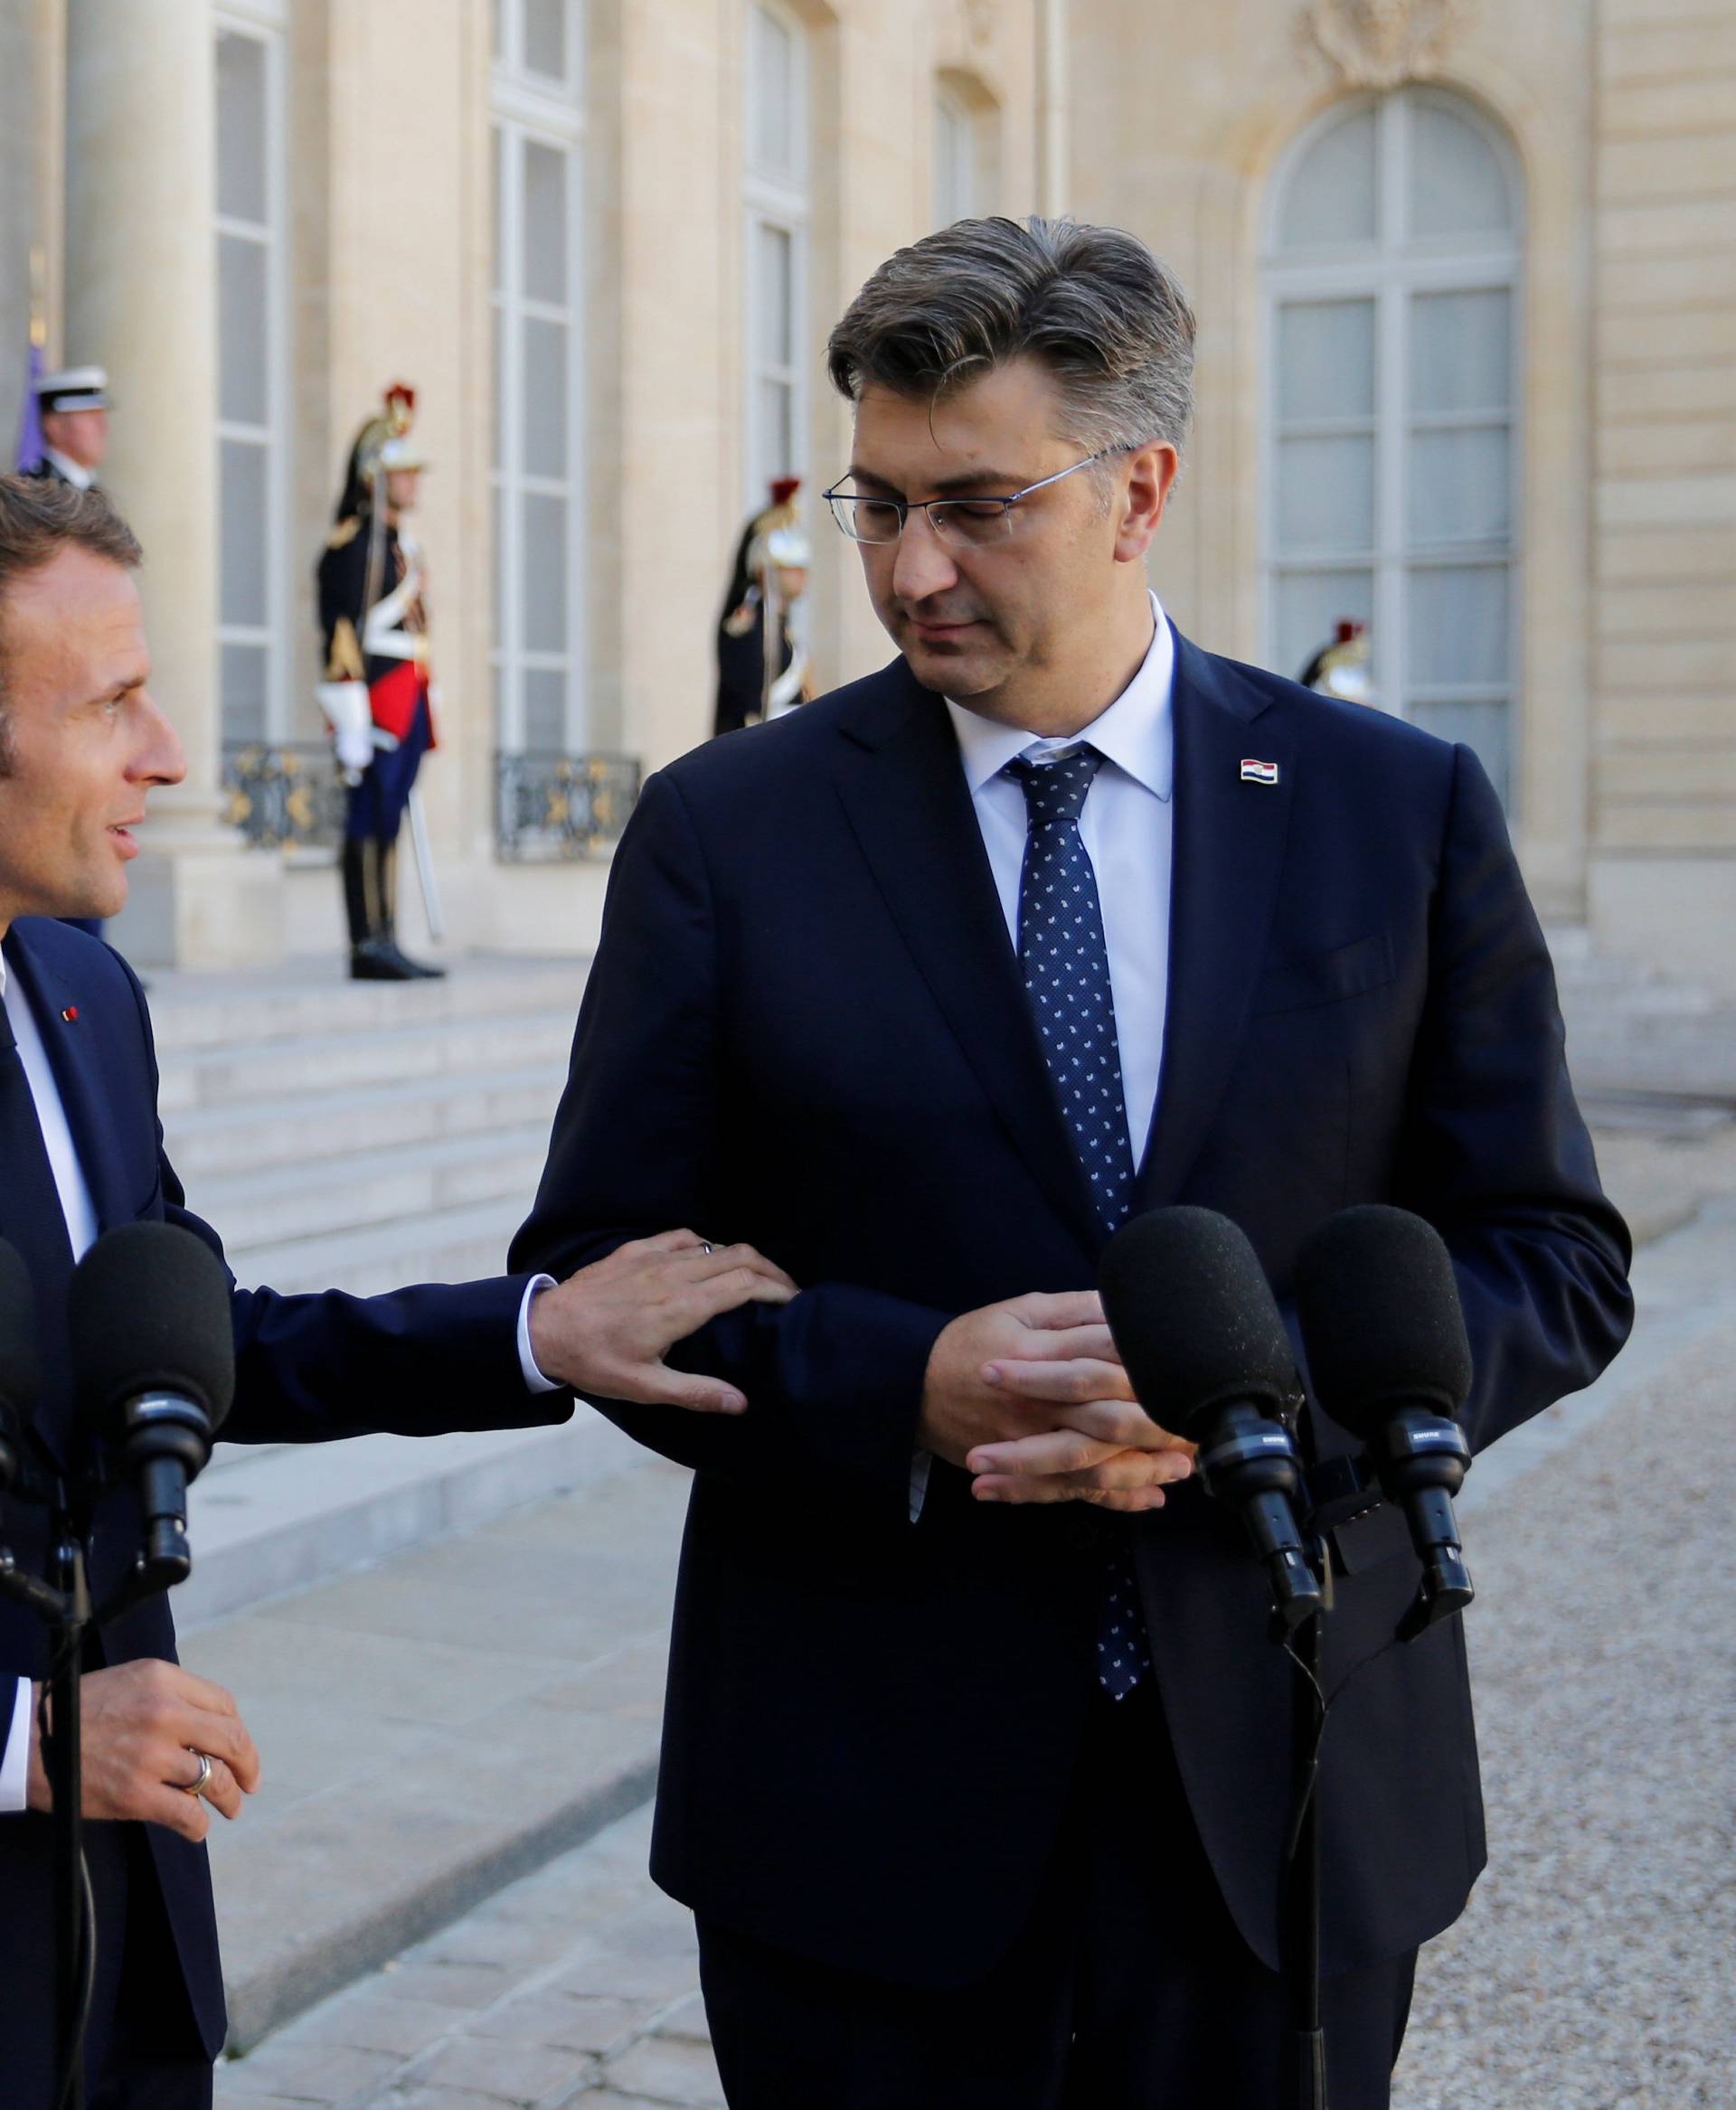 French President Emmanuel Macron and Croatian Prime Minister Andrej Plenkovic make a statement in the courtyard of the Elysee Palace in Paris